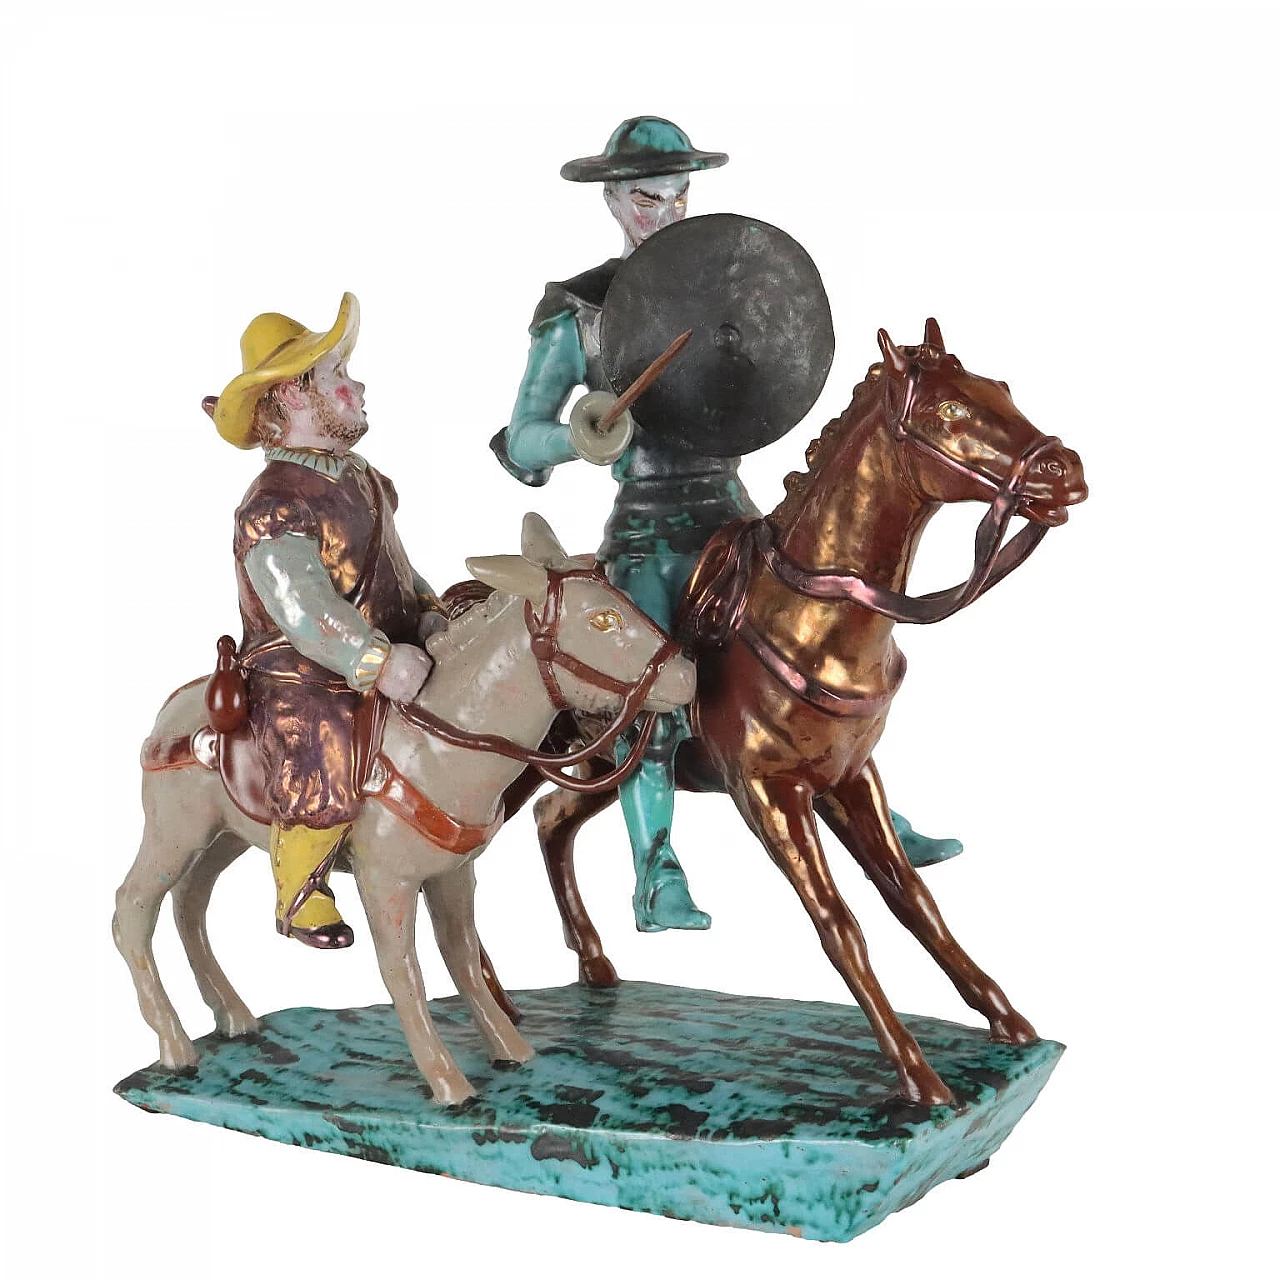 Glazed terracotta Don Quixote and Sancho Panza sculpture by Trevir 1